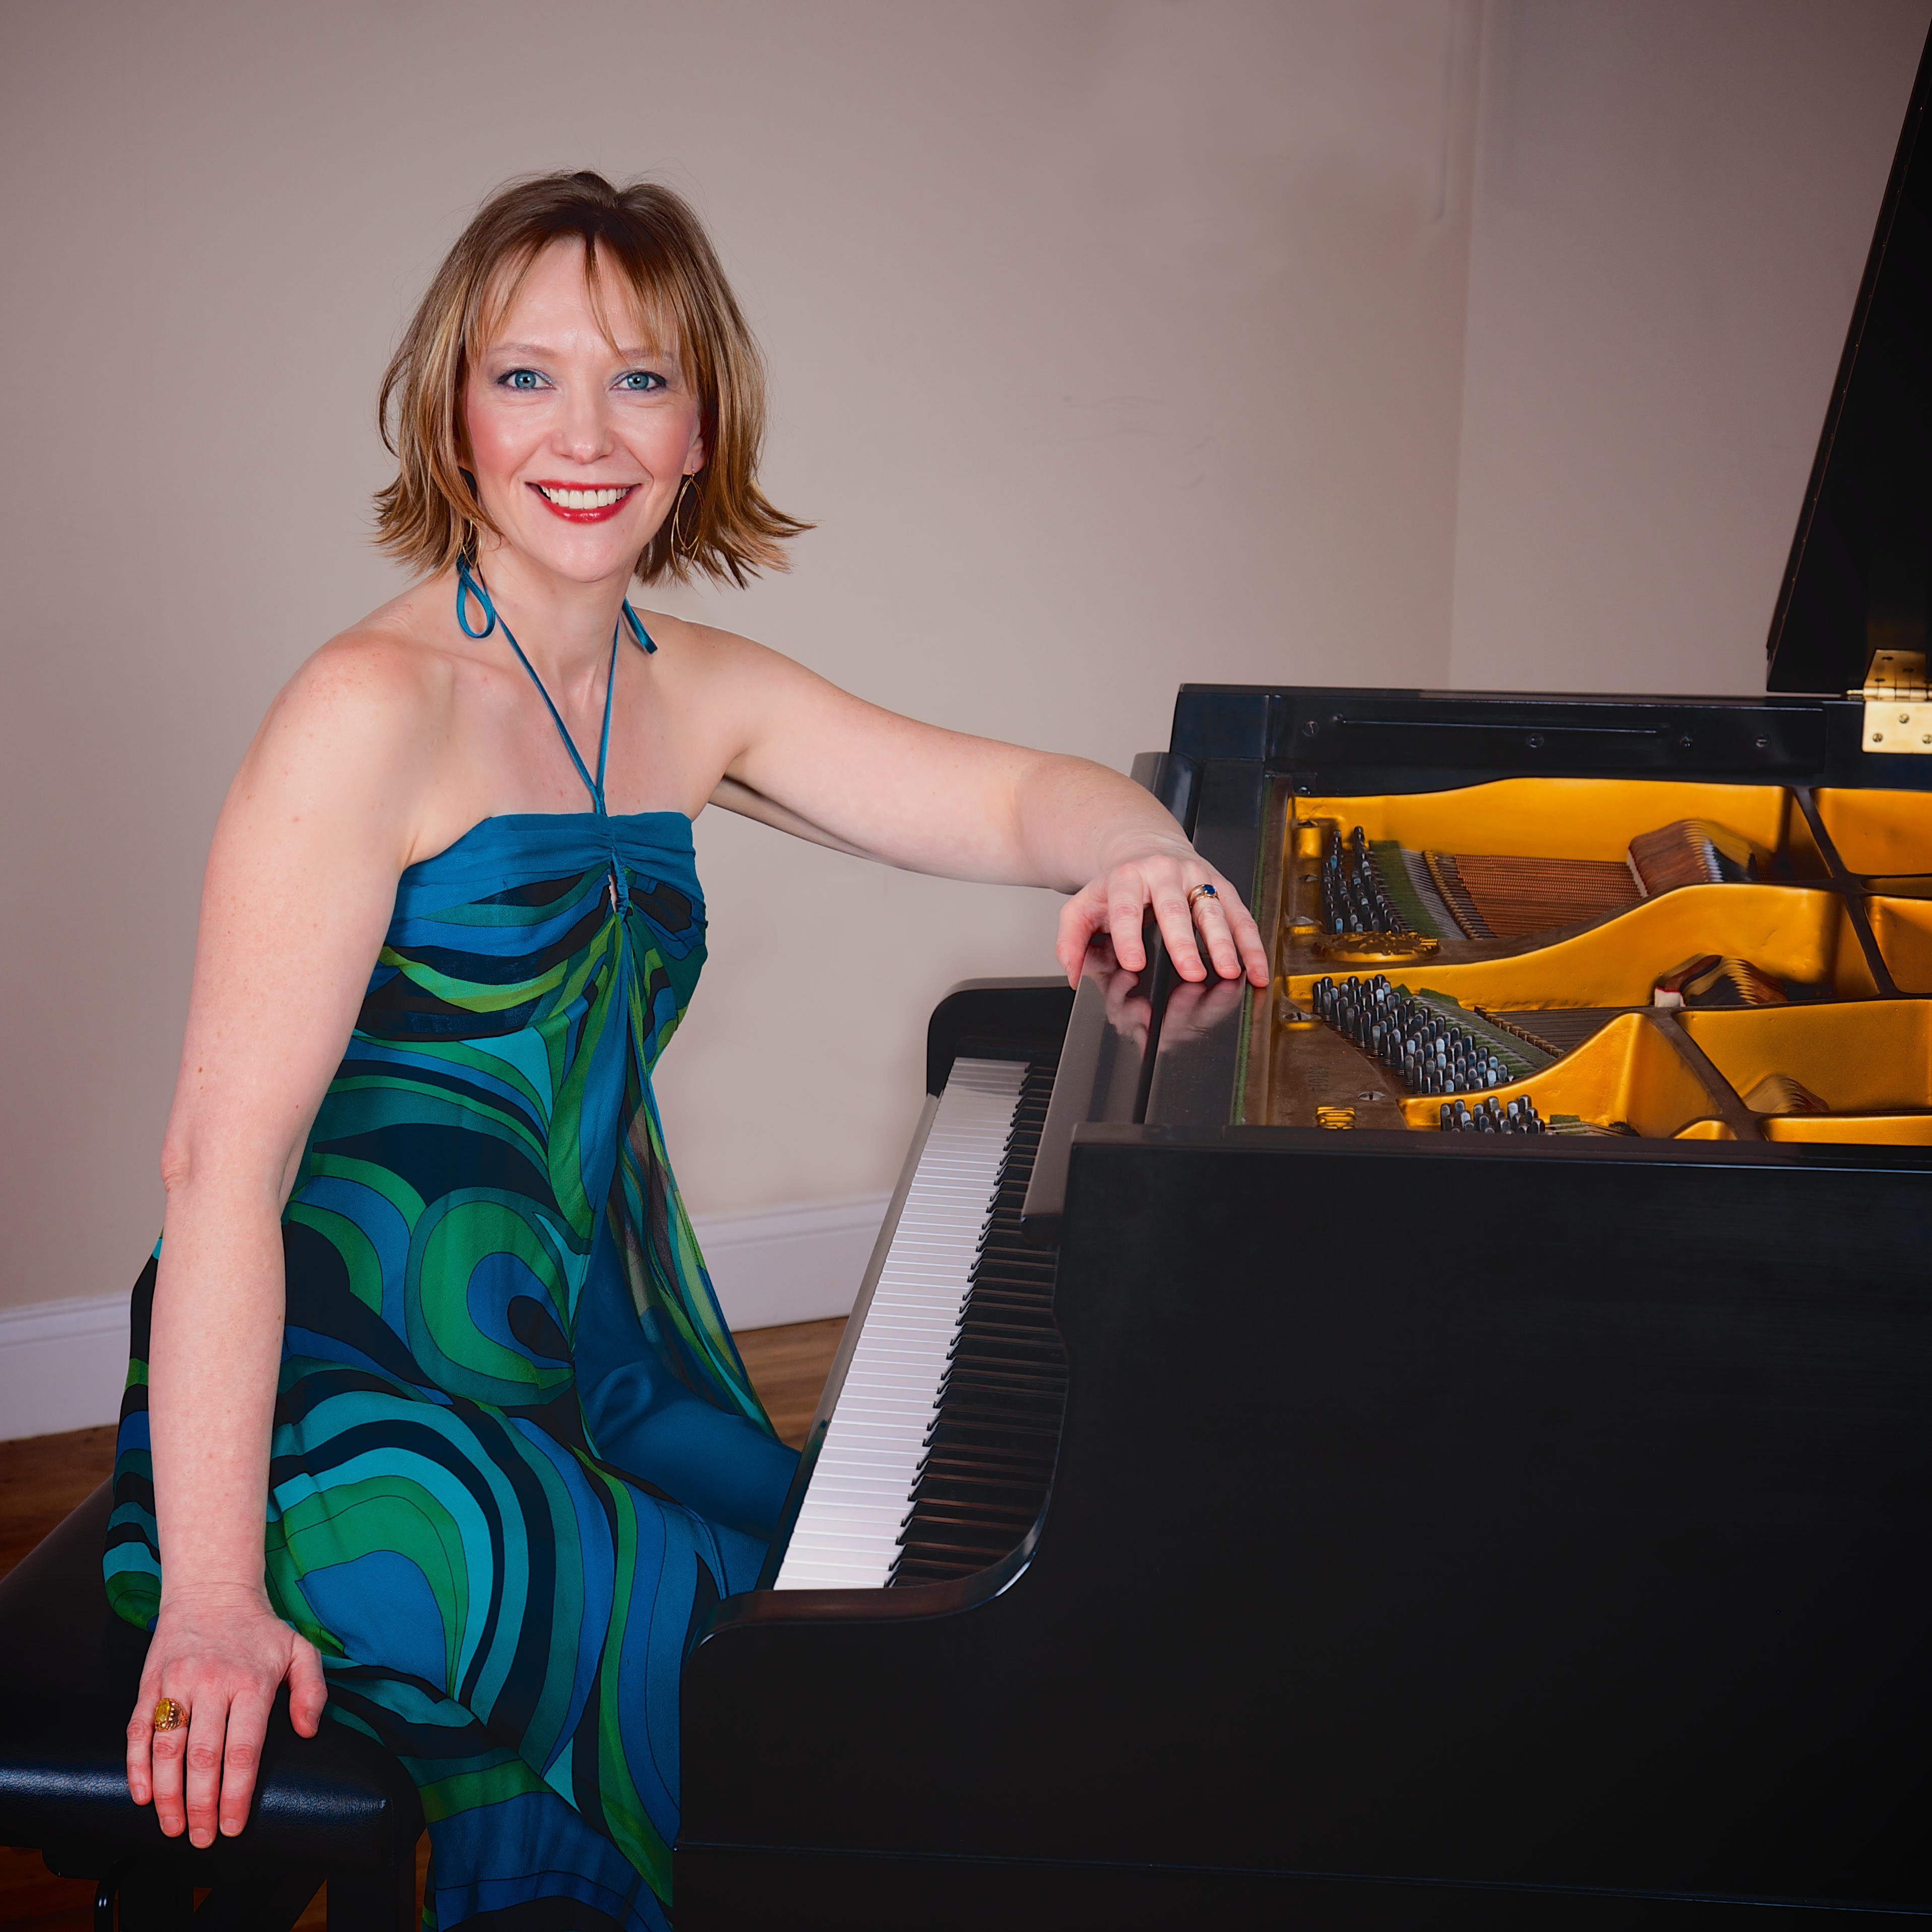 A photo of Oxana Mikhailoff, wearing a blue and green dress, seated at the piano.